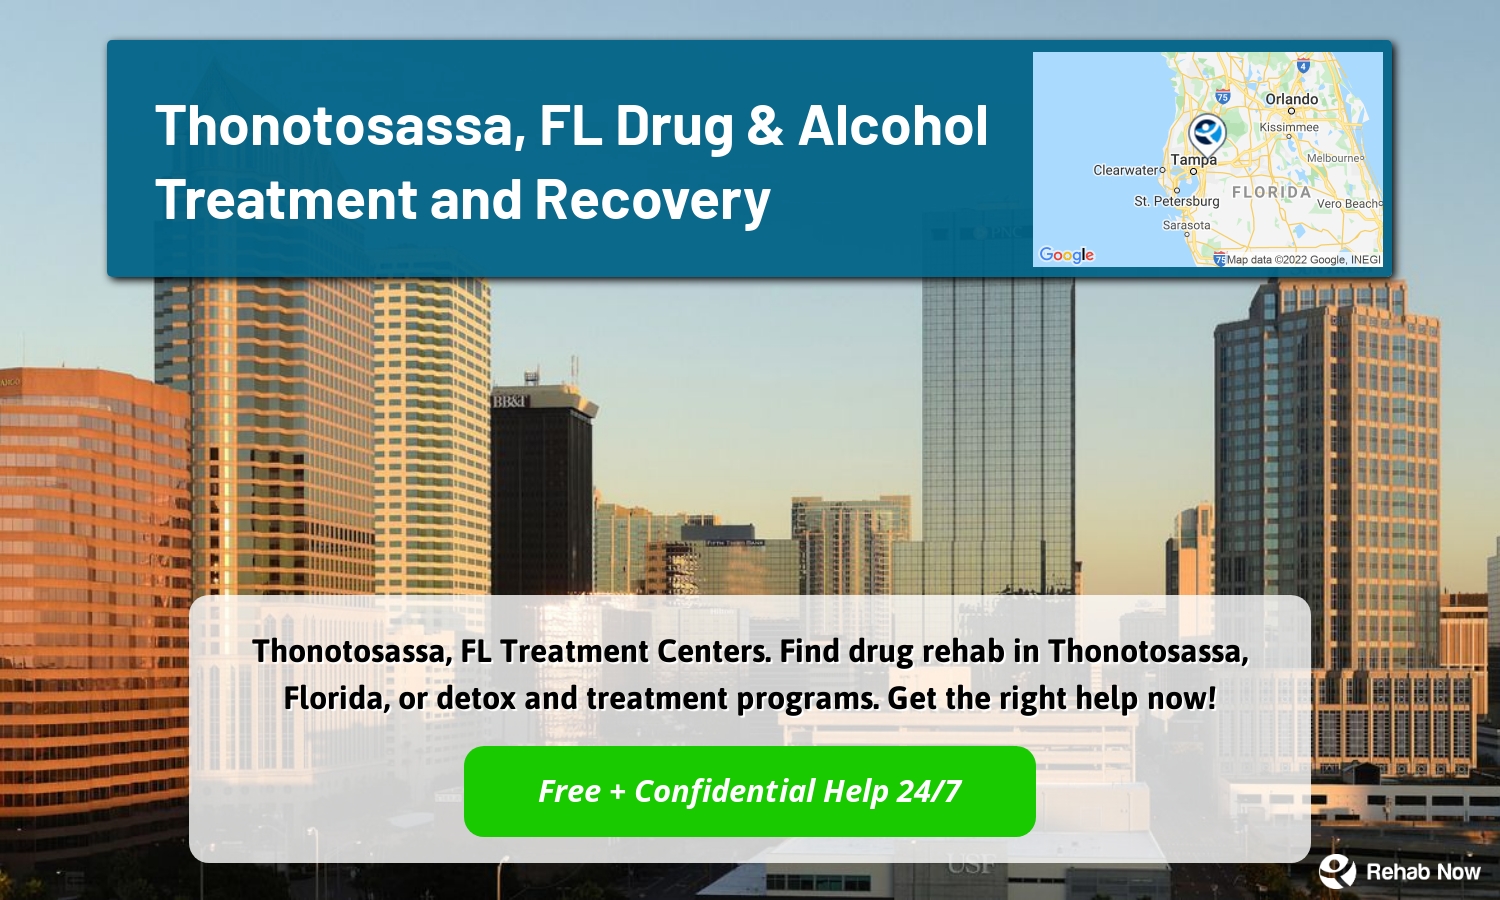 Thonotosassa, FL Treatment Centers. Find drug rehab in Thonotosassa, Florida, or detox and treatment programs. Get the right help now!